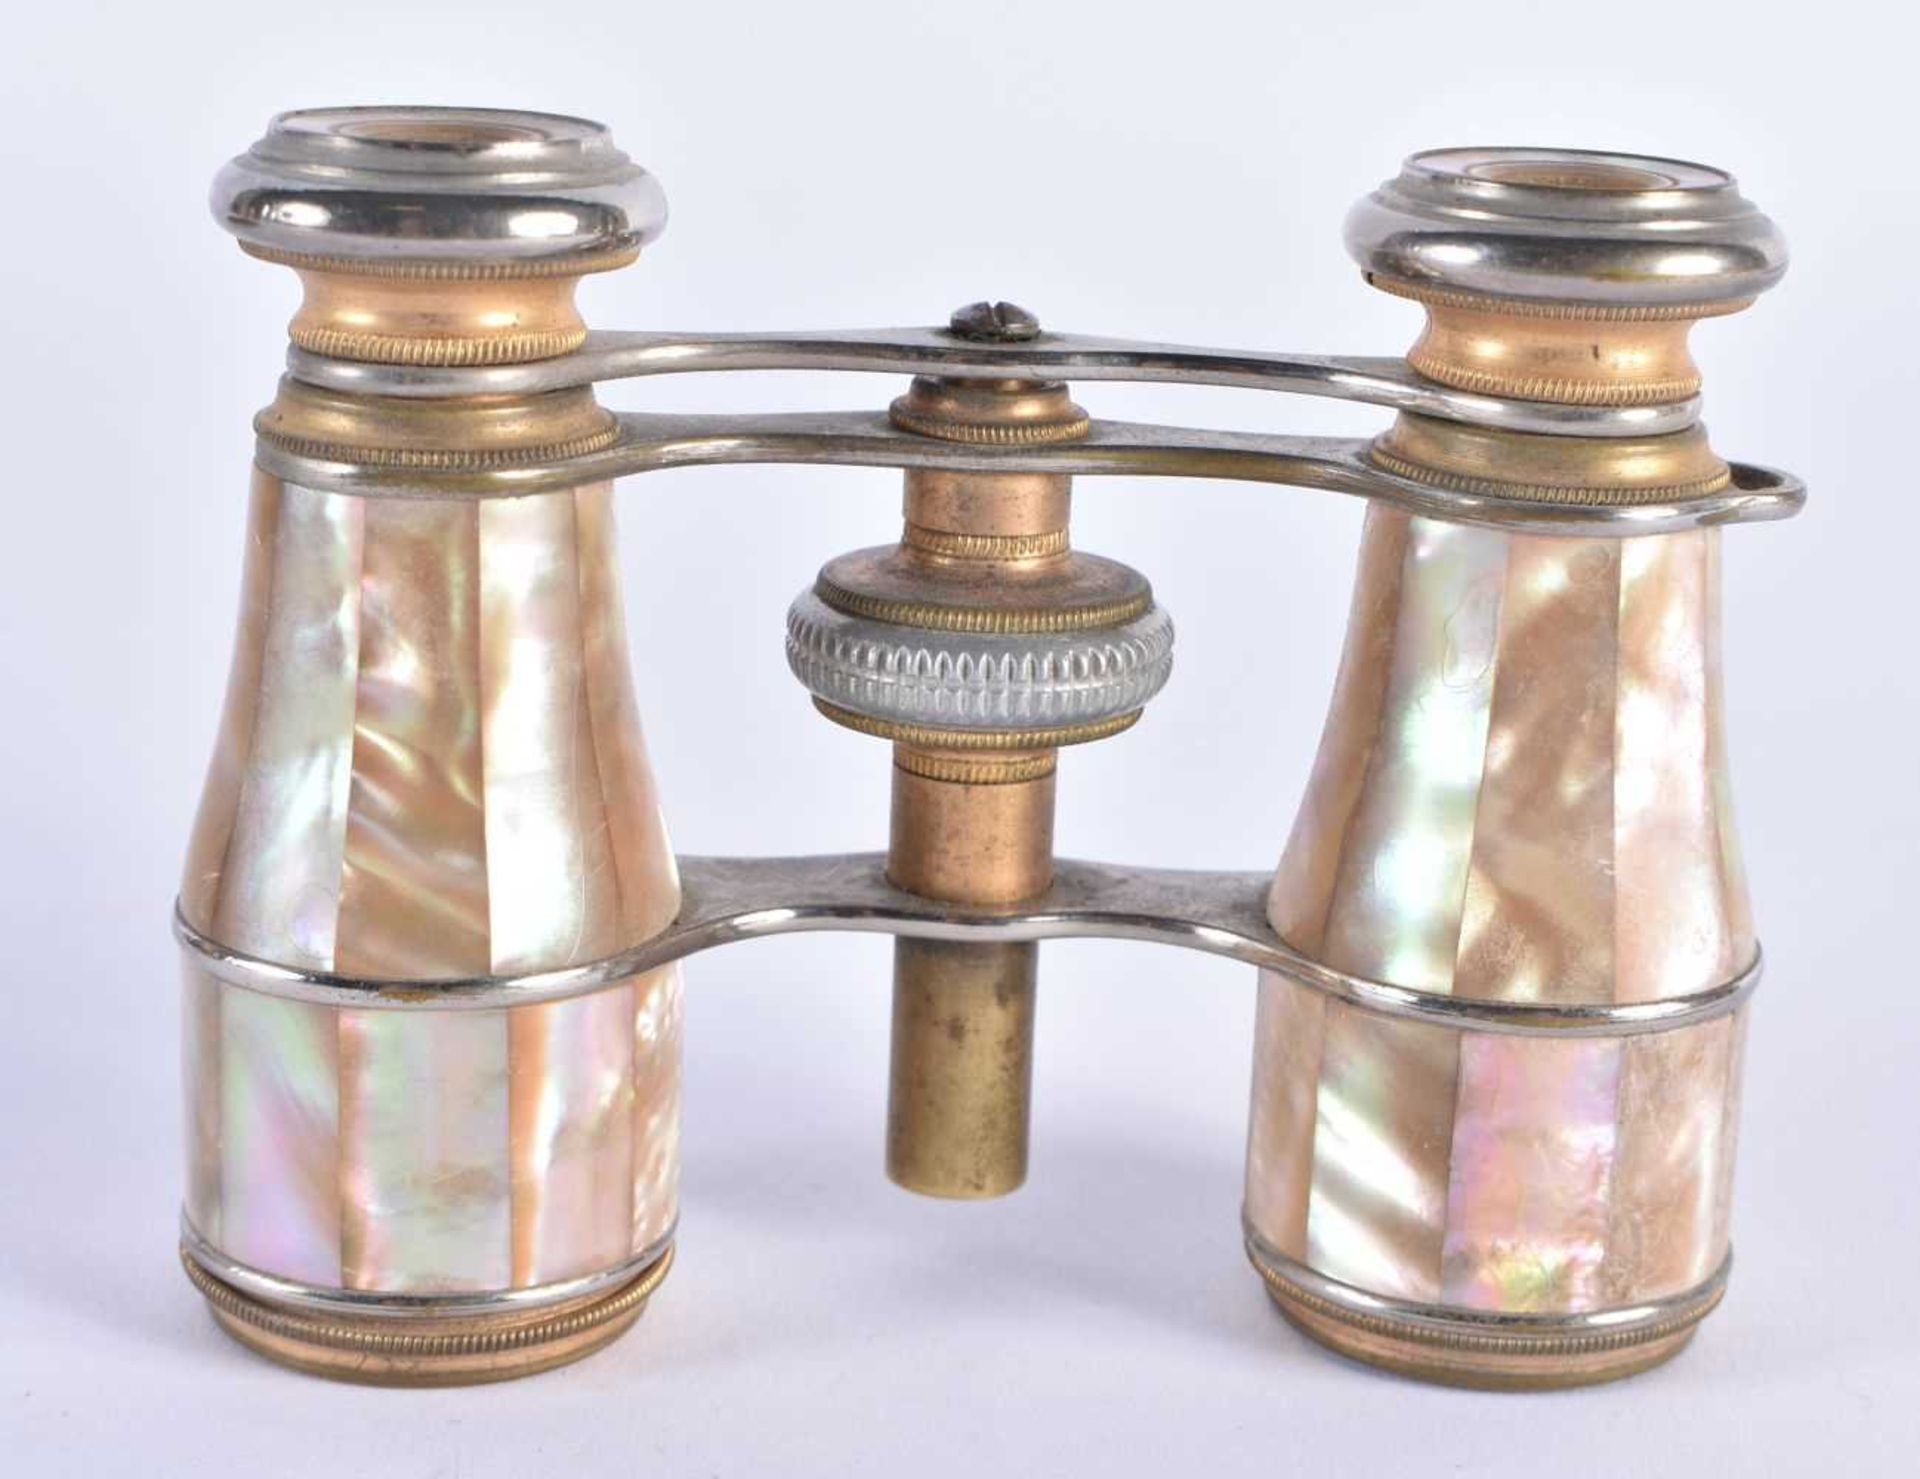 A PAIR OF MOTHER OF PEARL OPERA GLASSES. 9 cm x 8 cm extended. - Image 4 of 5